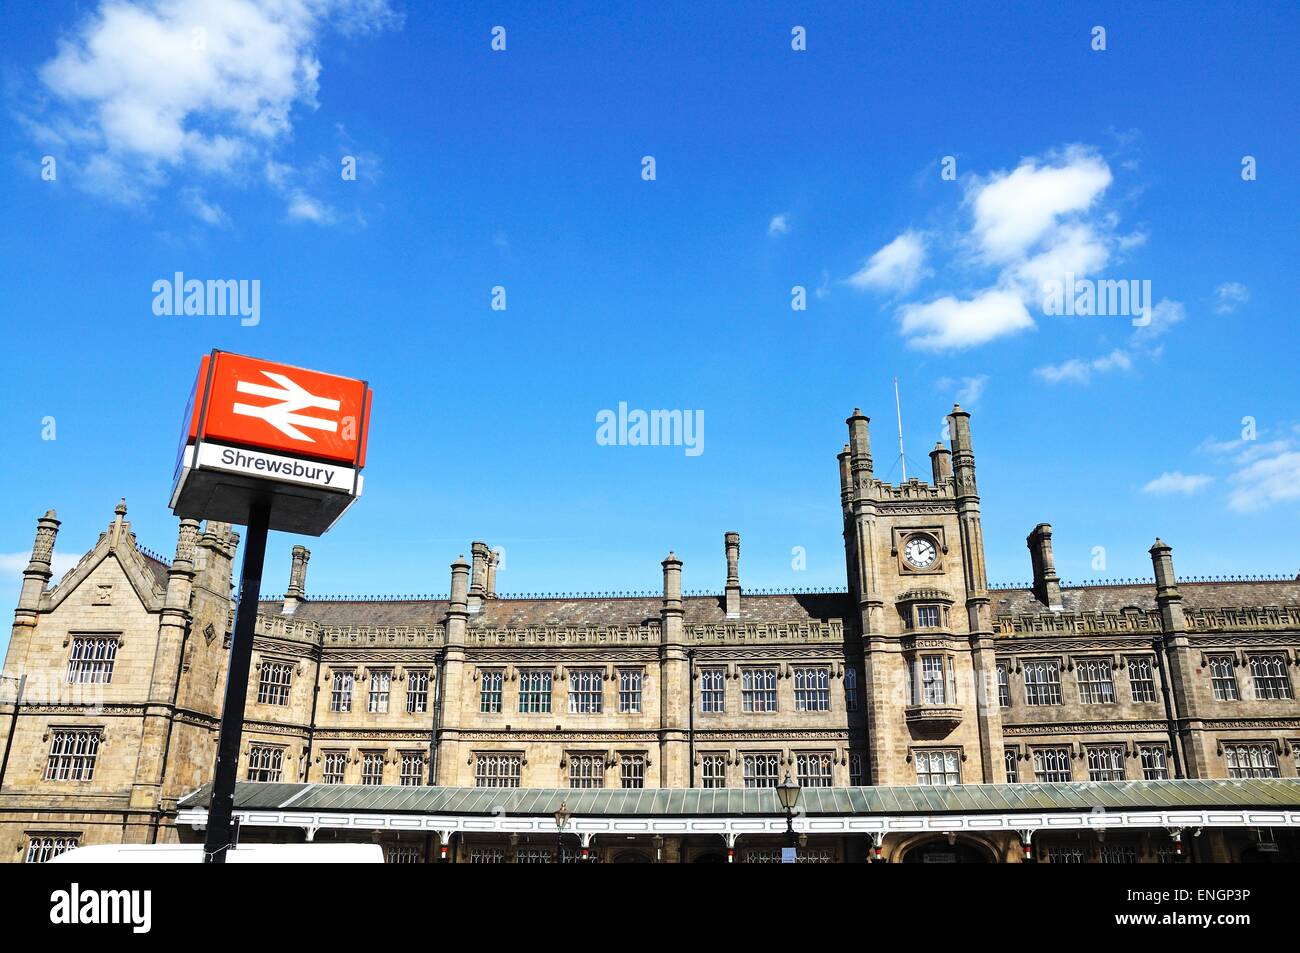 View of the Railway Station with the Station sign in the foreground, Shrewsbury, Shropshire, England, UK, Western Europe. Stock Photo